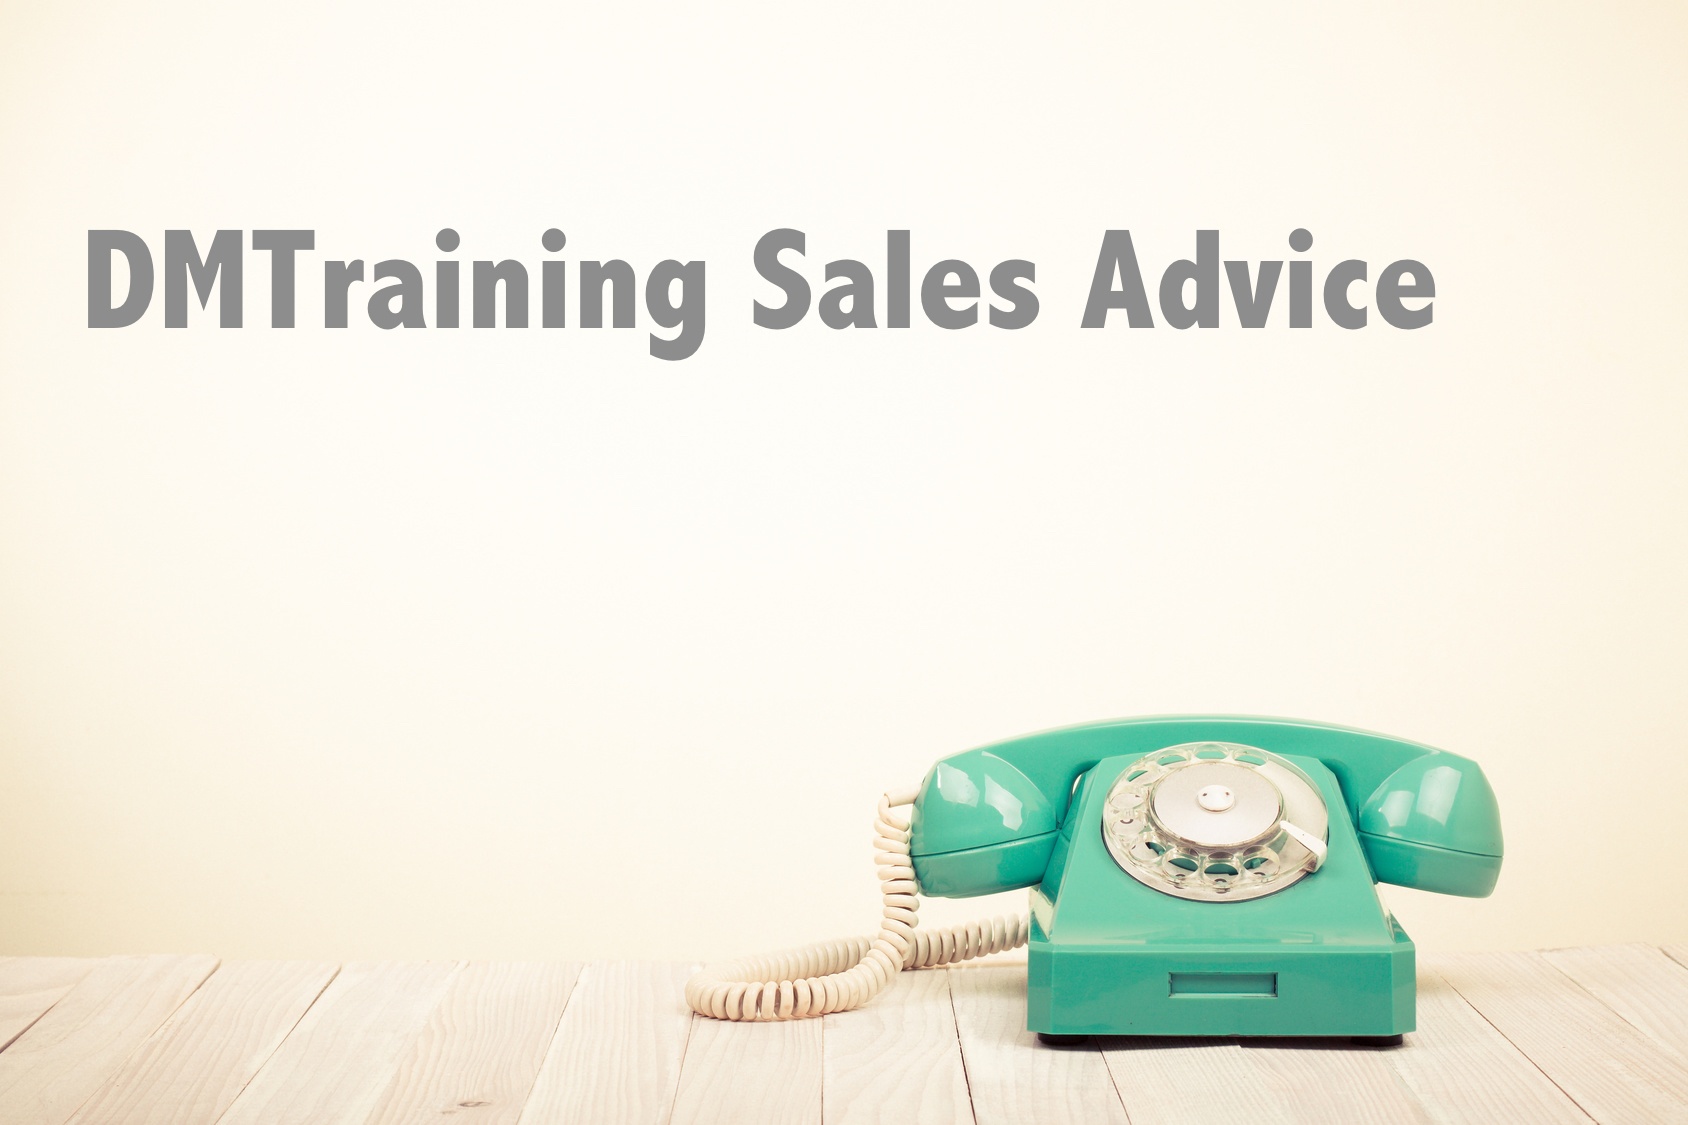 DMTraining Sales Advice: Changing Contacts